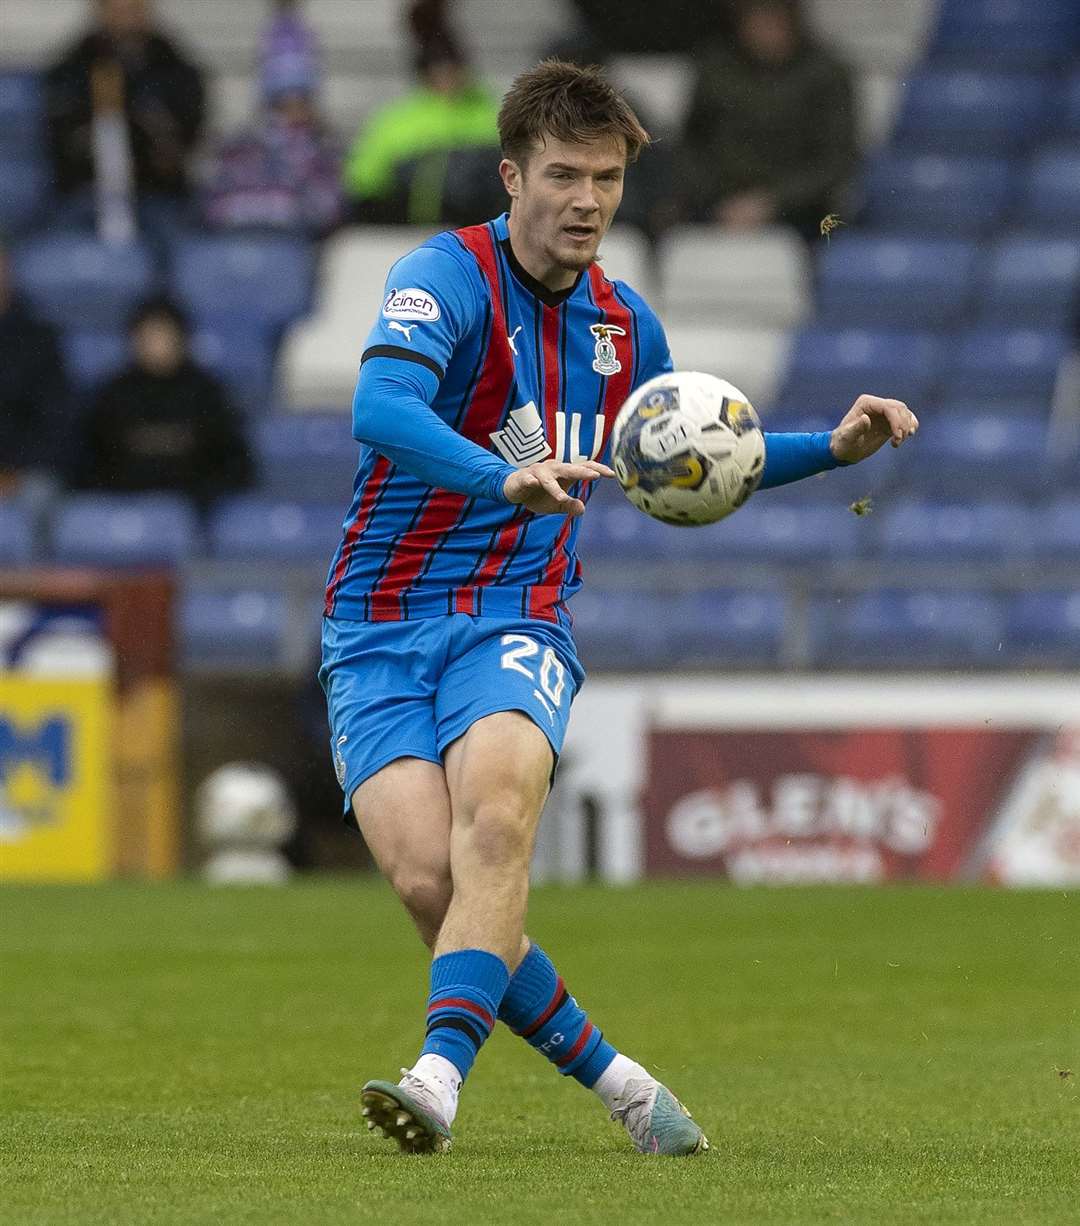 Morgan Boyes has been a key part of the Caley Thistle side since signing on loan. Picture: Ken Macpherson